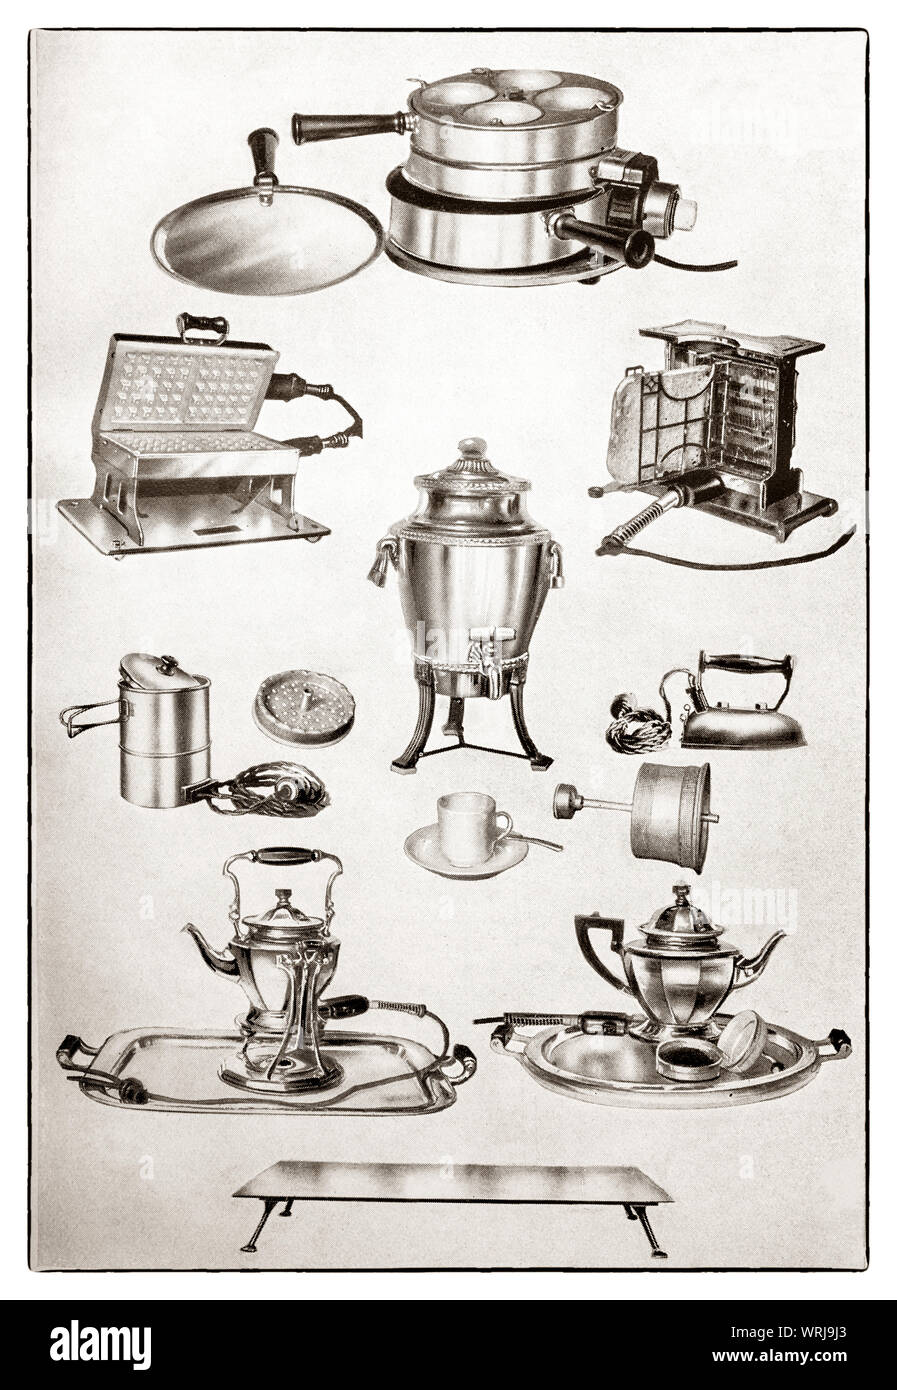 The latest kichenware displayed at the beginning of the 1930s in Mrs Beeton's 'All About Cookery' 1930 Edition. The featured items, all electric table apparatus include a griller; waffle iron; toaster; liquid heater; coffee percolator; iron; kettle; tea pot (with infuser) and a hot plate. Stock Photo